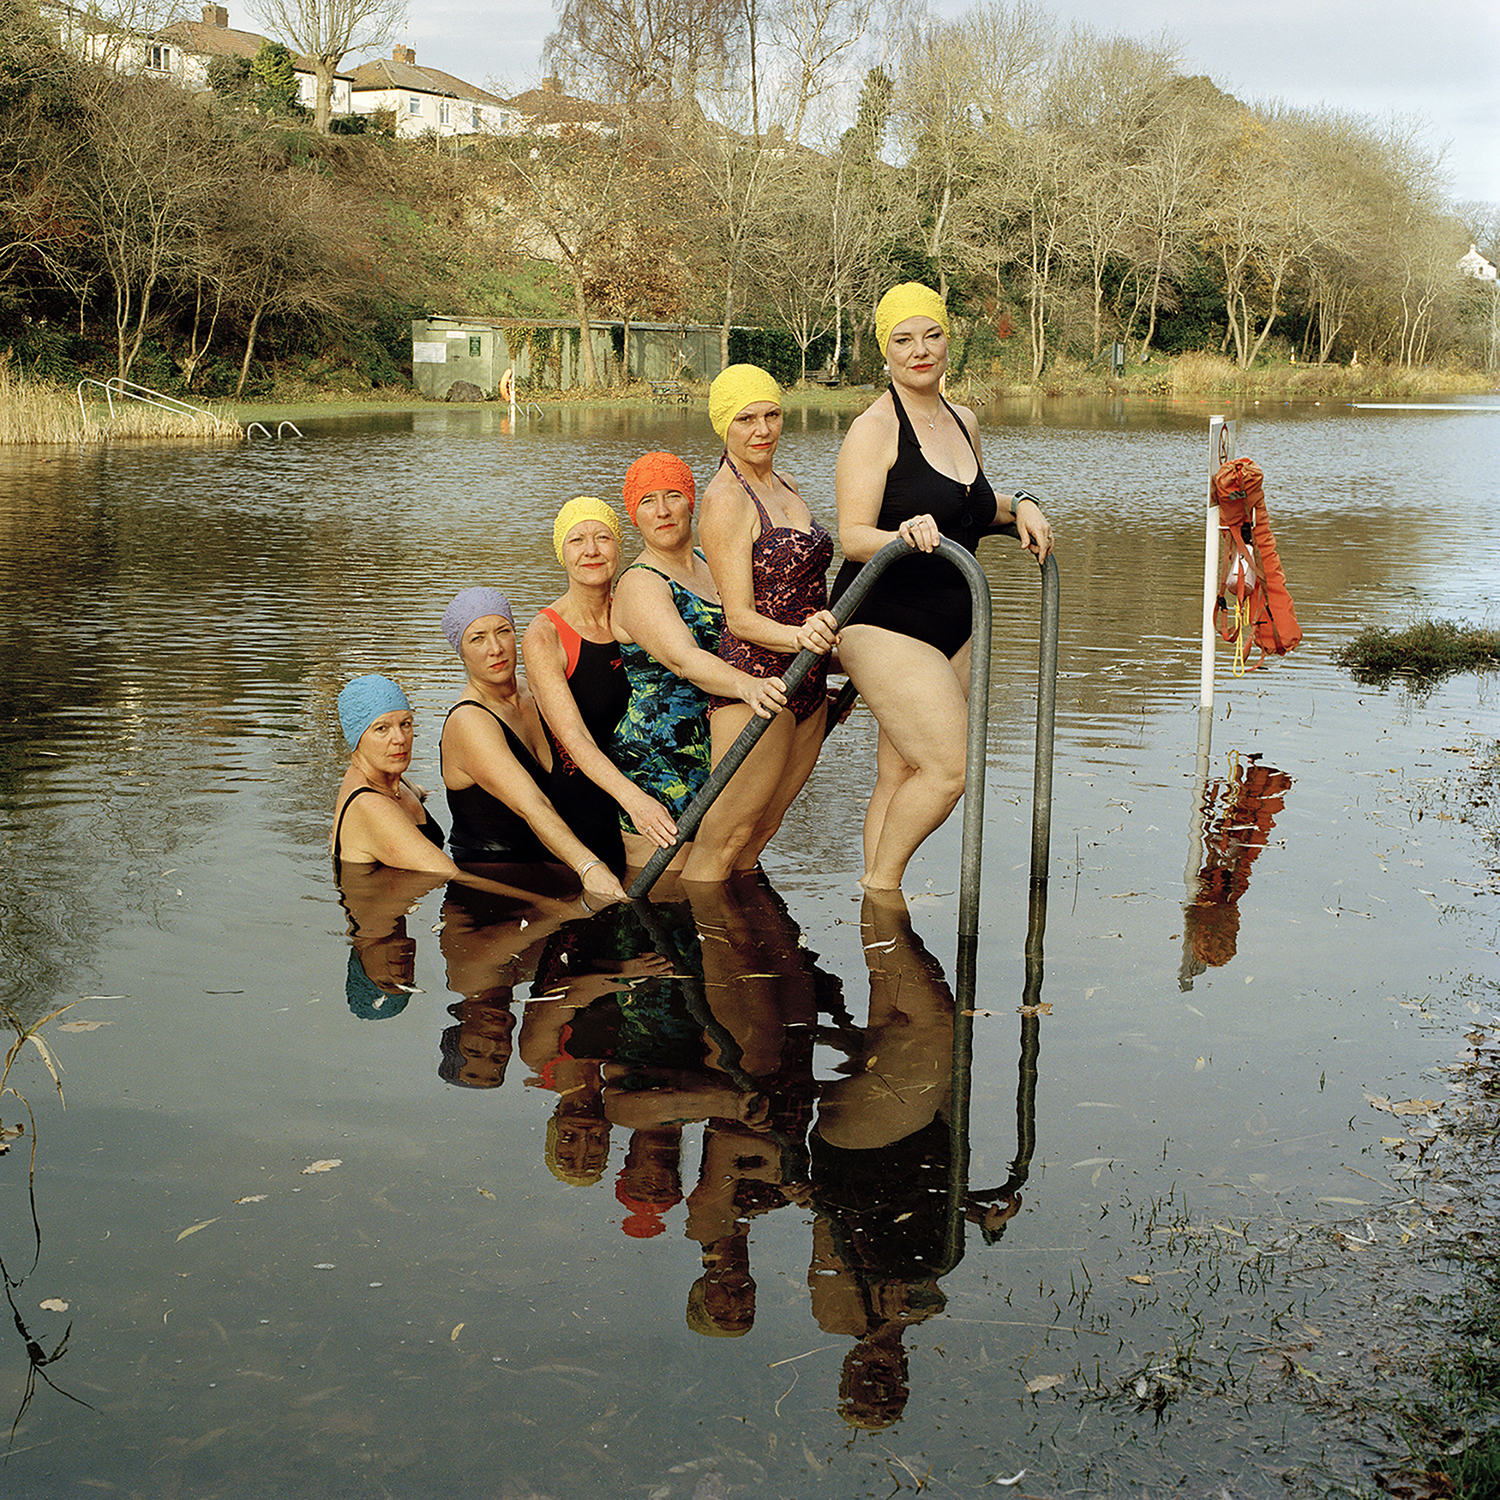 6 swimmers stood on a ladder in a lake with reflection